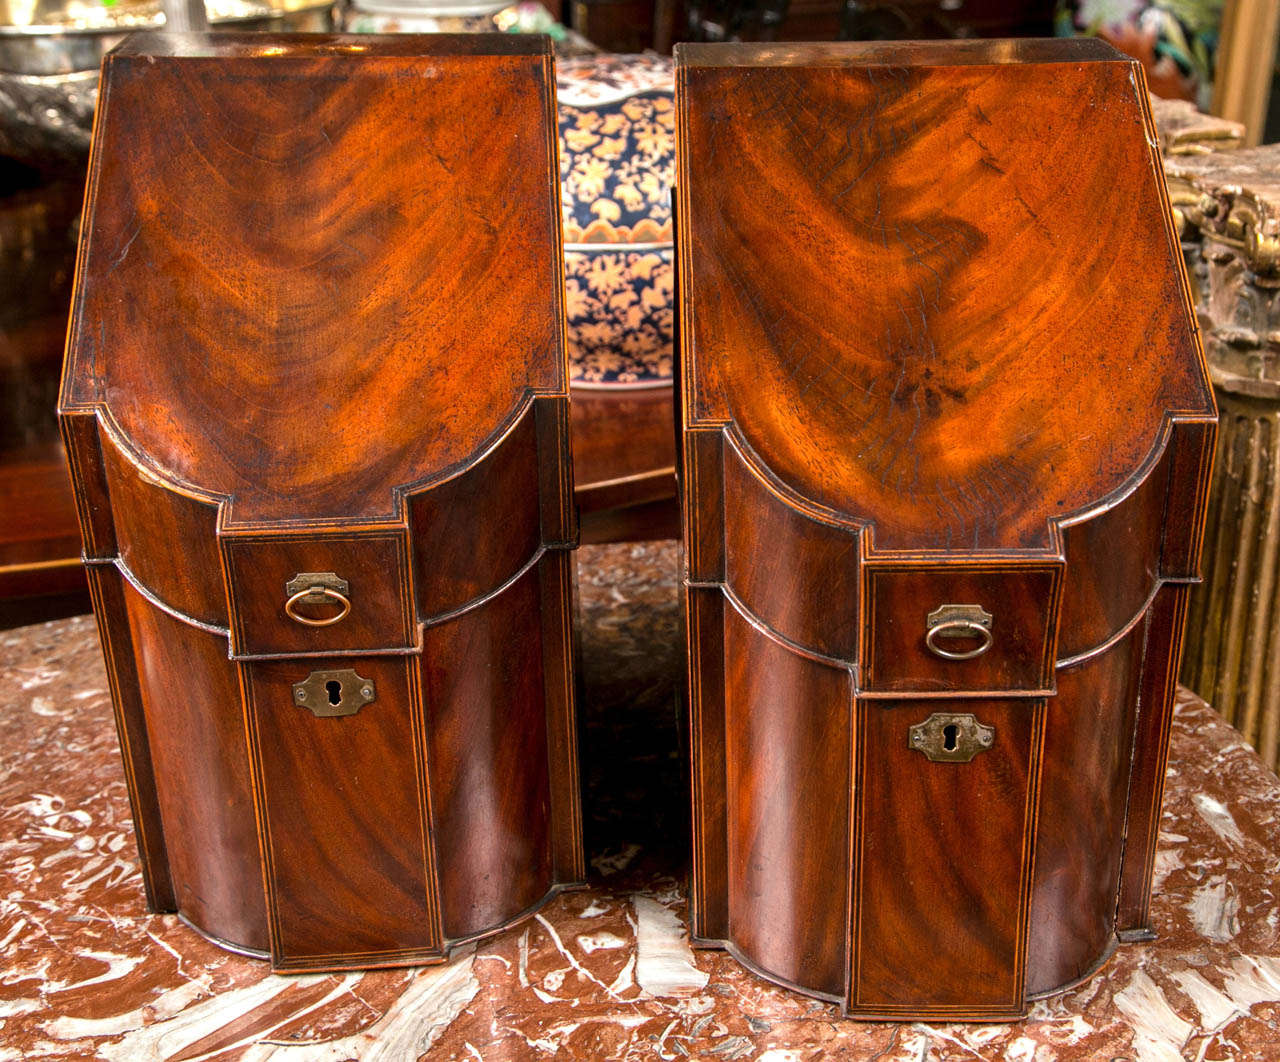 Dating from the late 18th or early 19th. century, pair of boxes were  probably originally knife or cutlery boxes. Now they are for  paper and letters.
Flame mahogany surfaces  with ebony and satinwood stringing, original brass fittings.  The